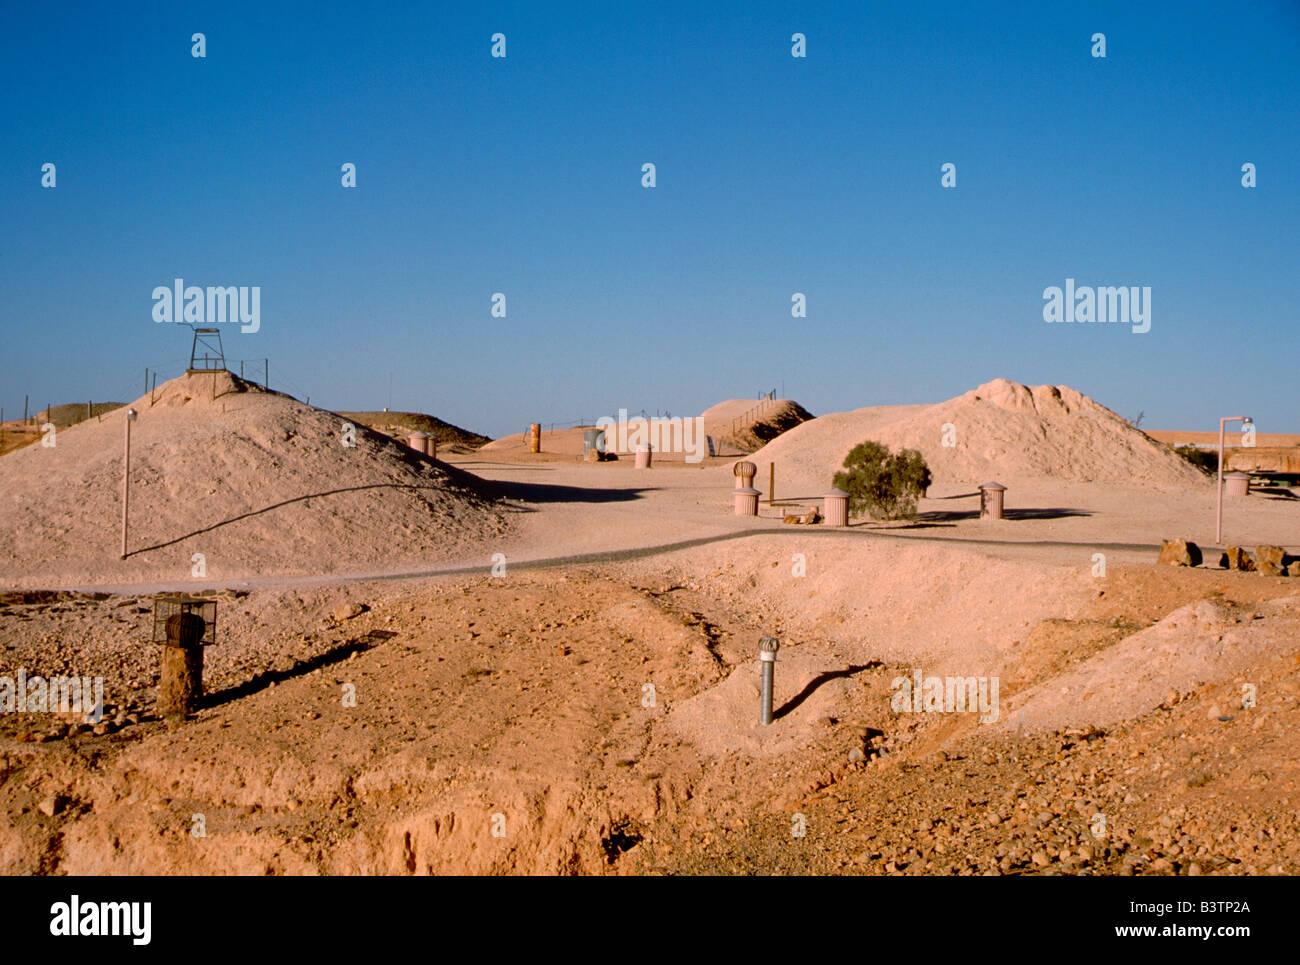 Australia, South Australia, Coober Pedy. Town of Coober Pedy, air vents for underground homes. Stock Photo